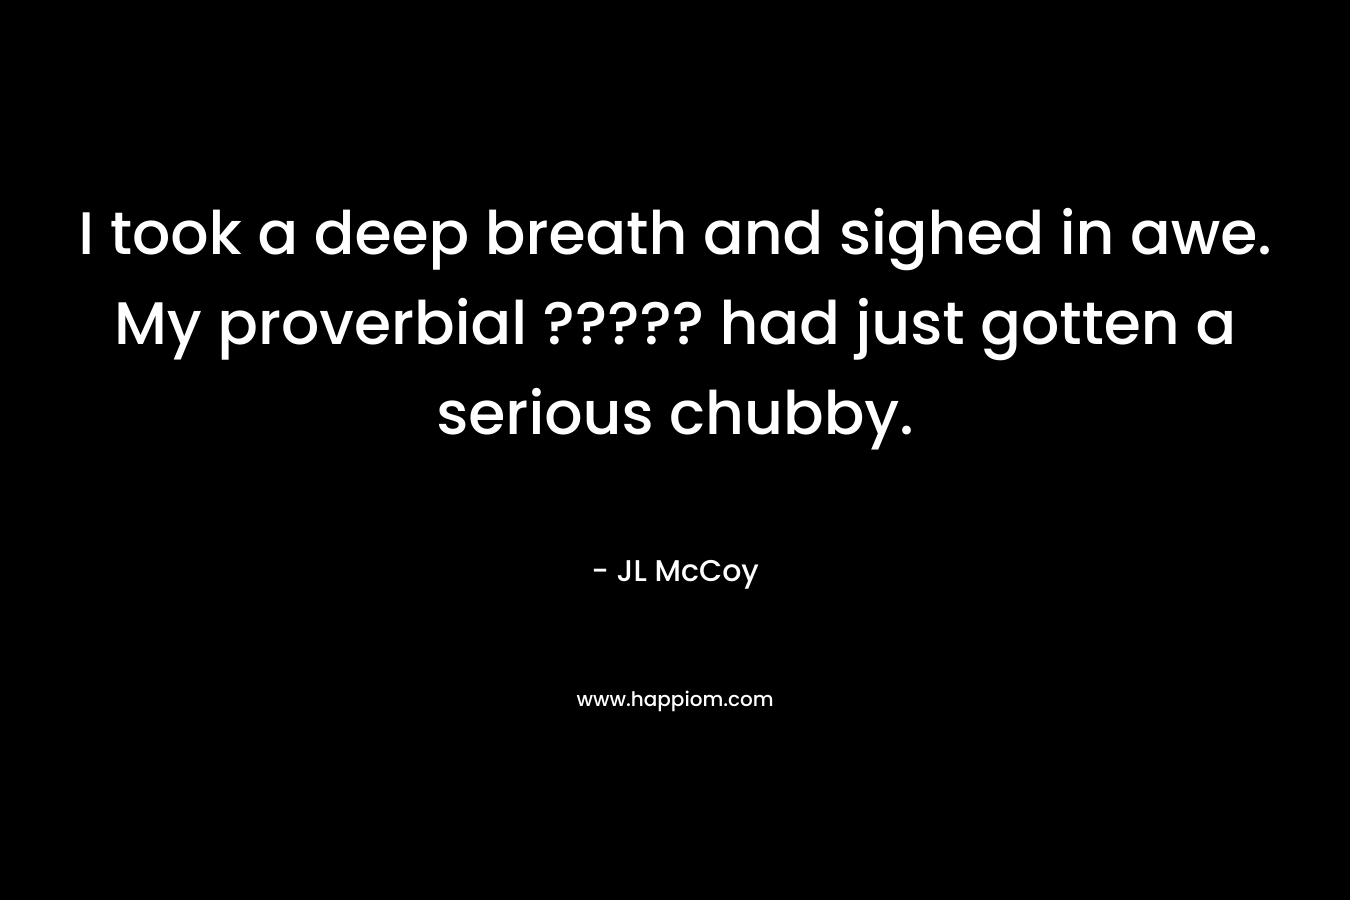 I took a deep breath and sighed in awe. My proverbial ????? had just gotten a serious chubby. – JL McCoy